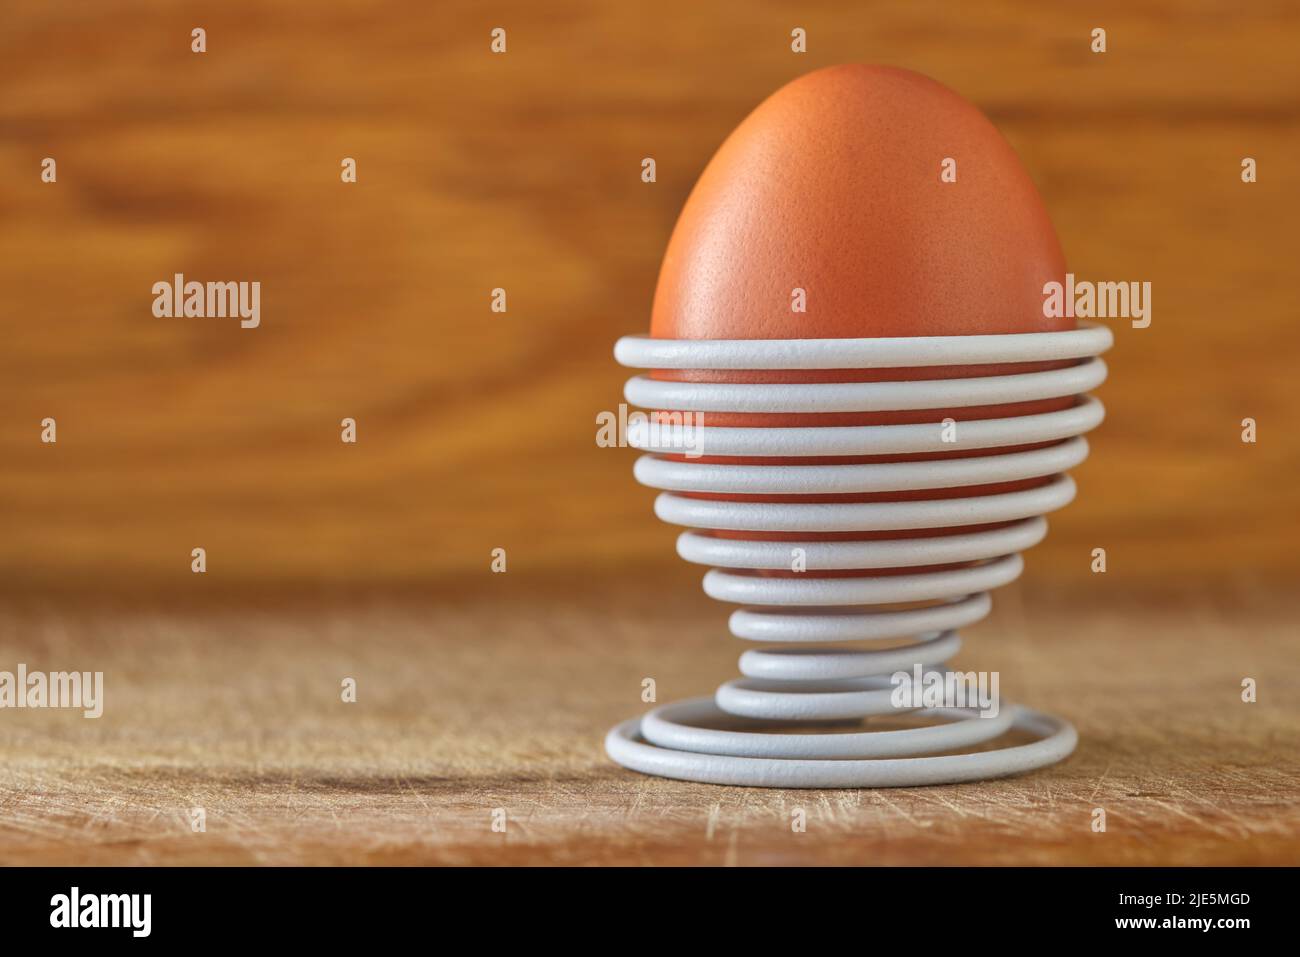 One boiled egg in a spiral-shaped white metal support on wood background with copy space Stock Photo